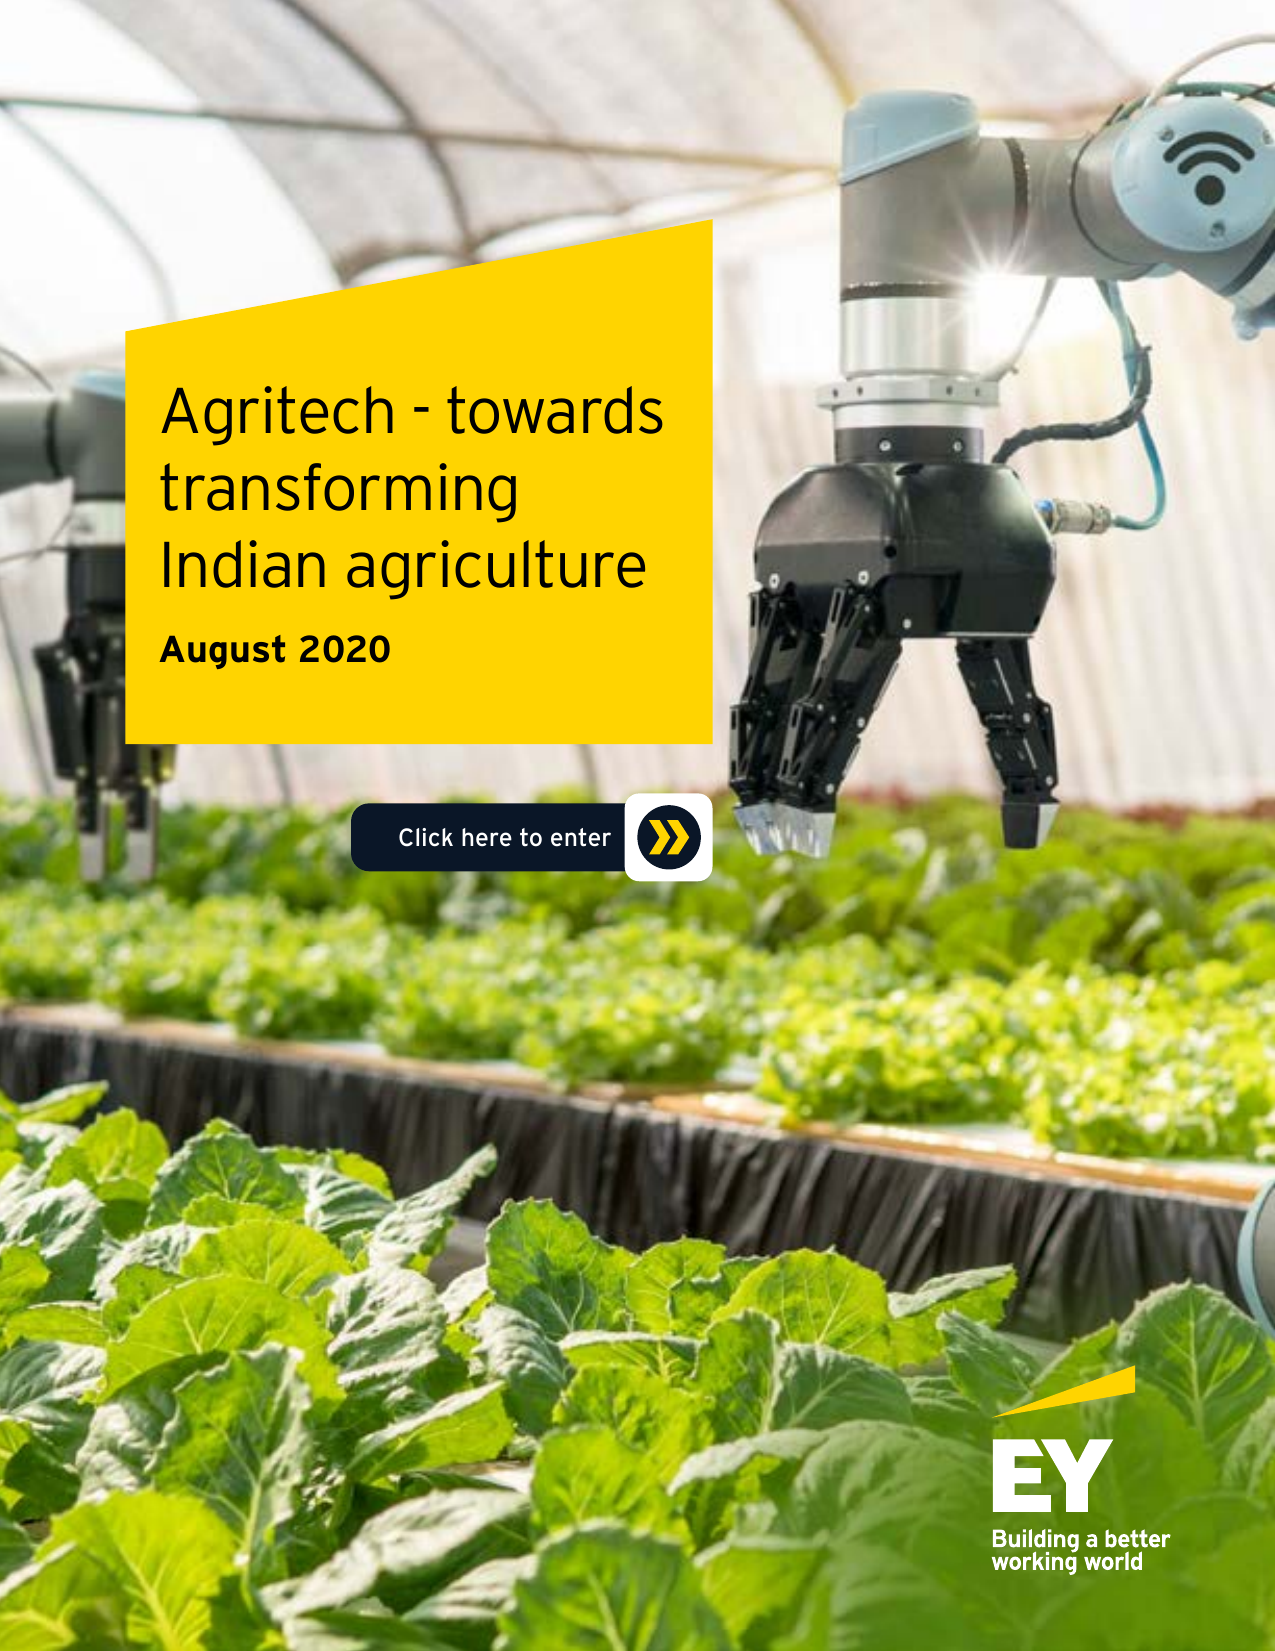 ey-agritech-towards-transforming-indian-agriculture